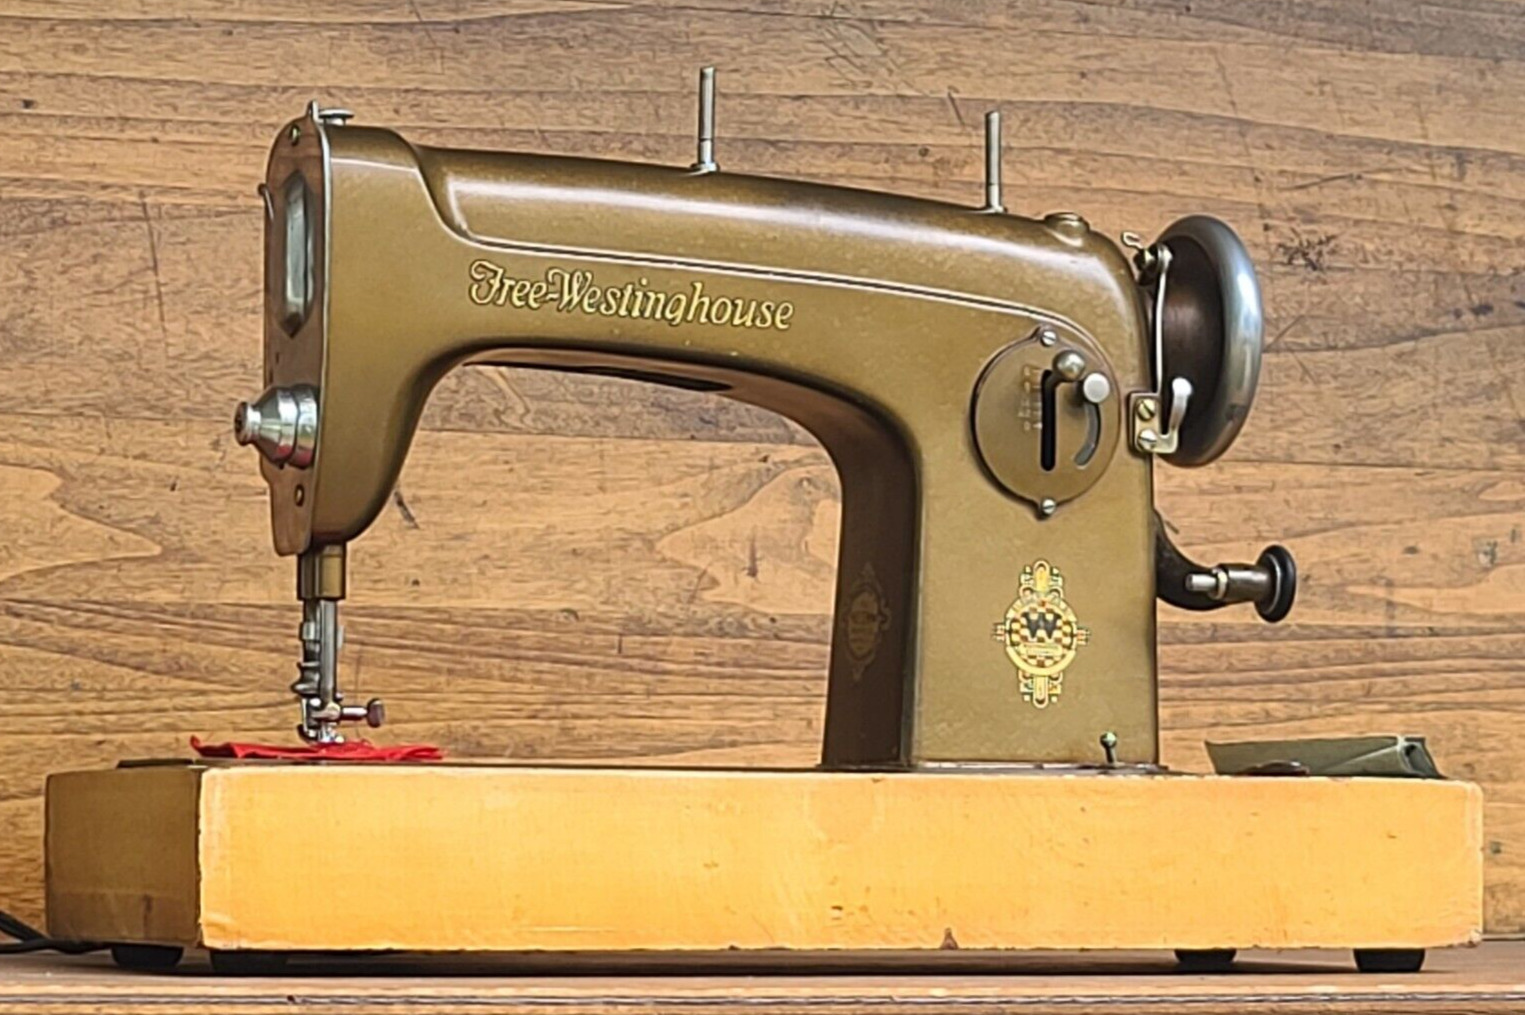 Free-Westinghouse Electric Rotary Sewing Machine Model ALC Type E w Carry Case